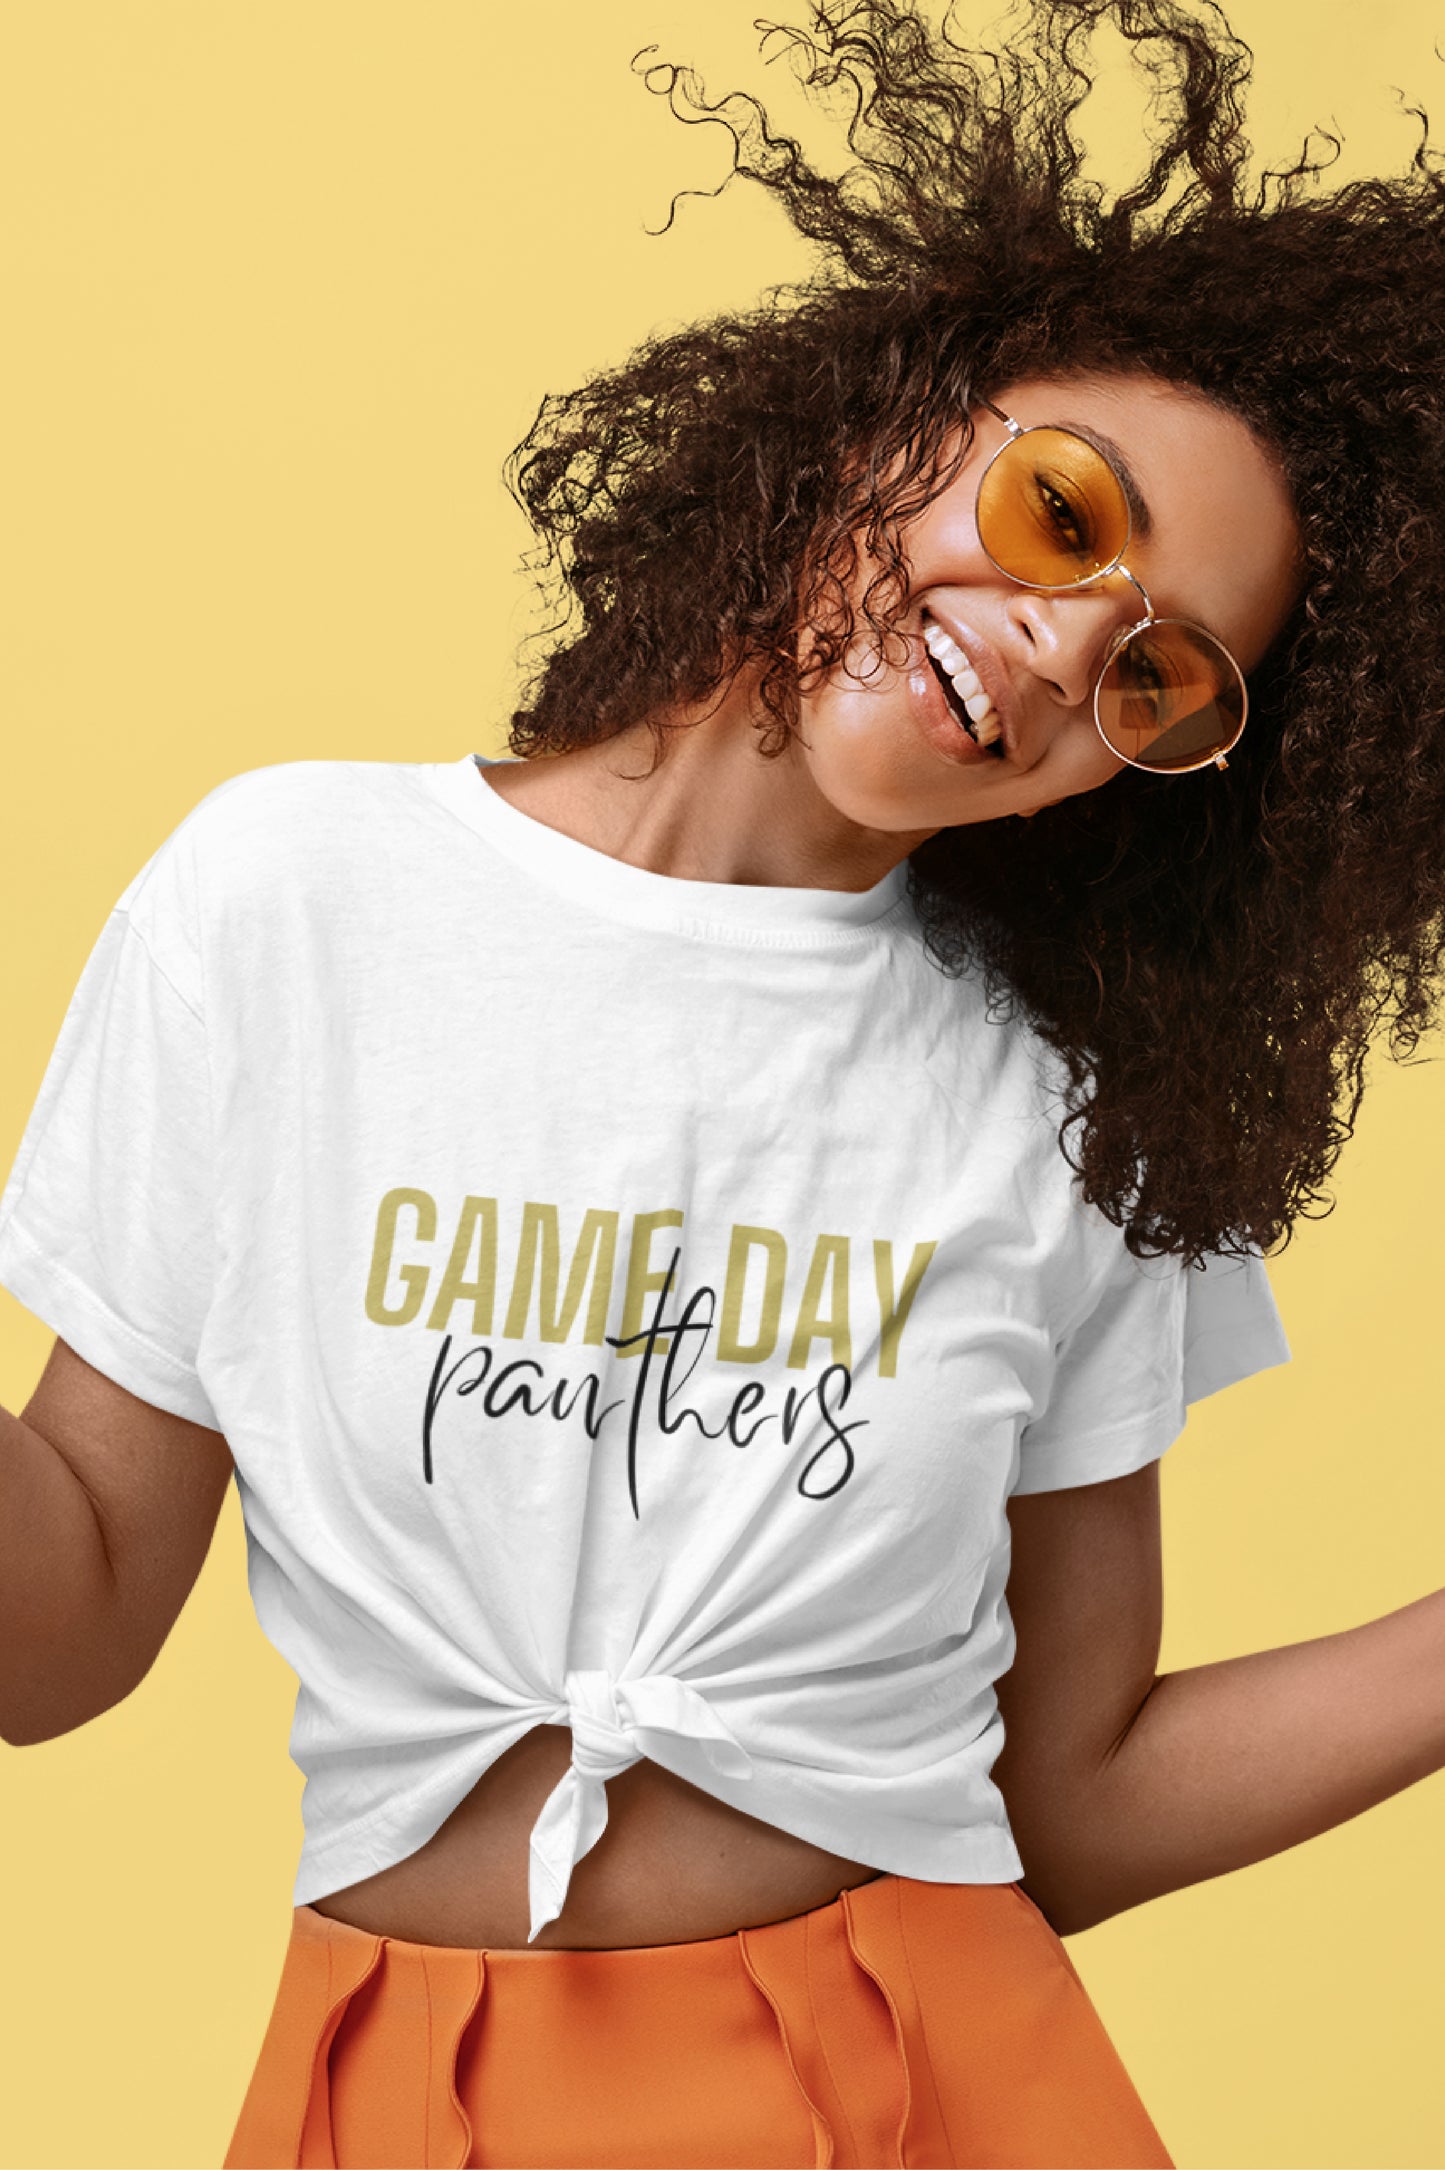 Game Day Panthers - T-Shirt (White)